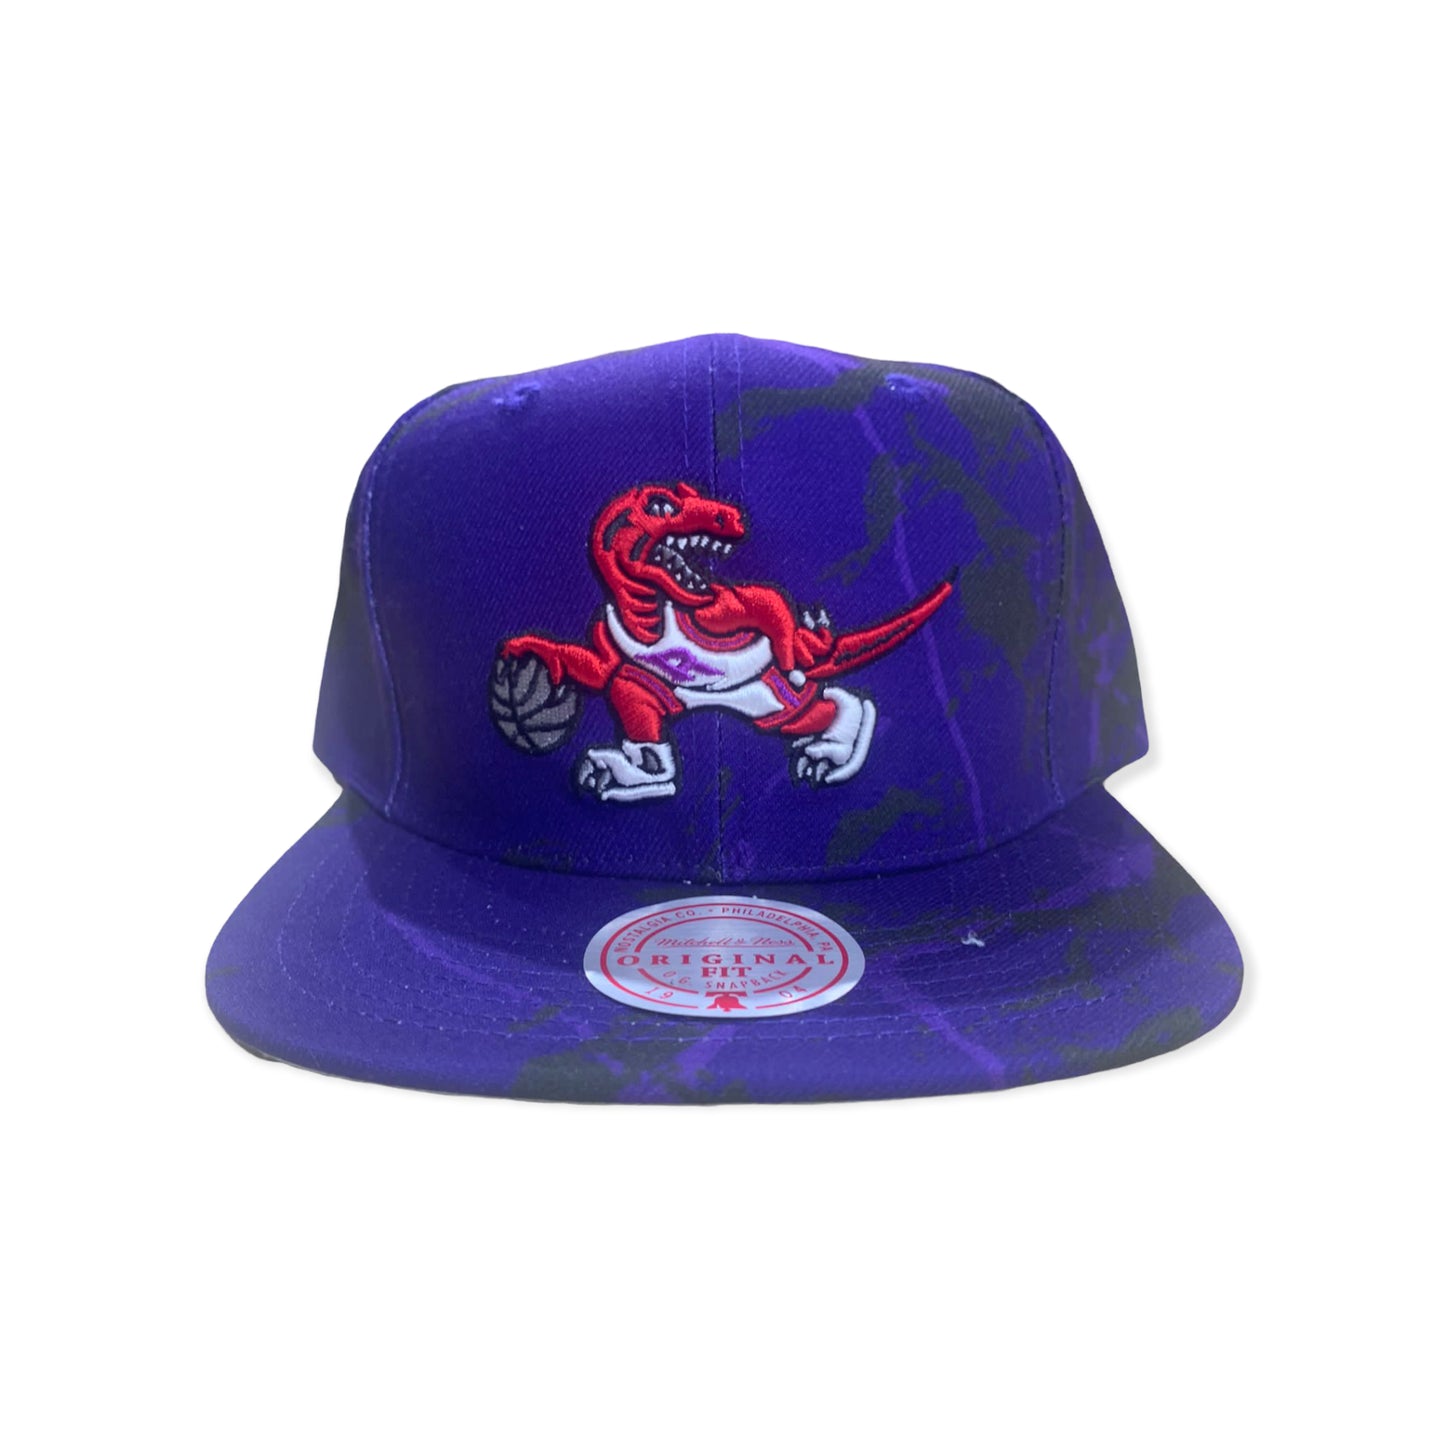 MITCHELL & NESS: Raptors Down For All Snapback